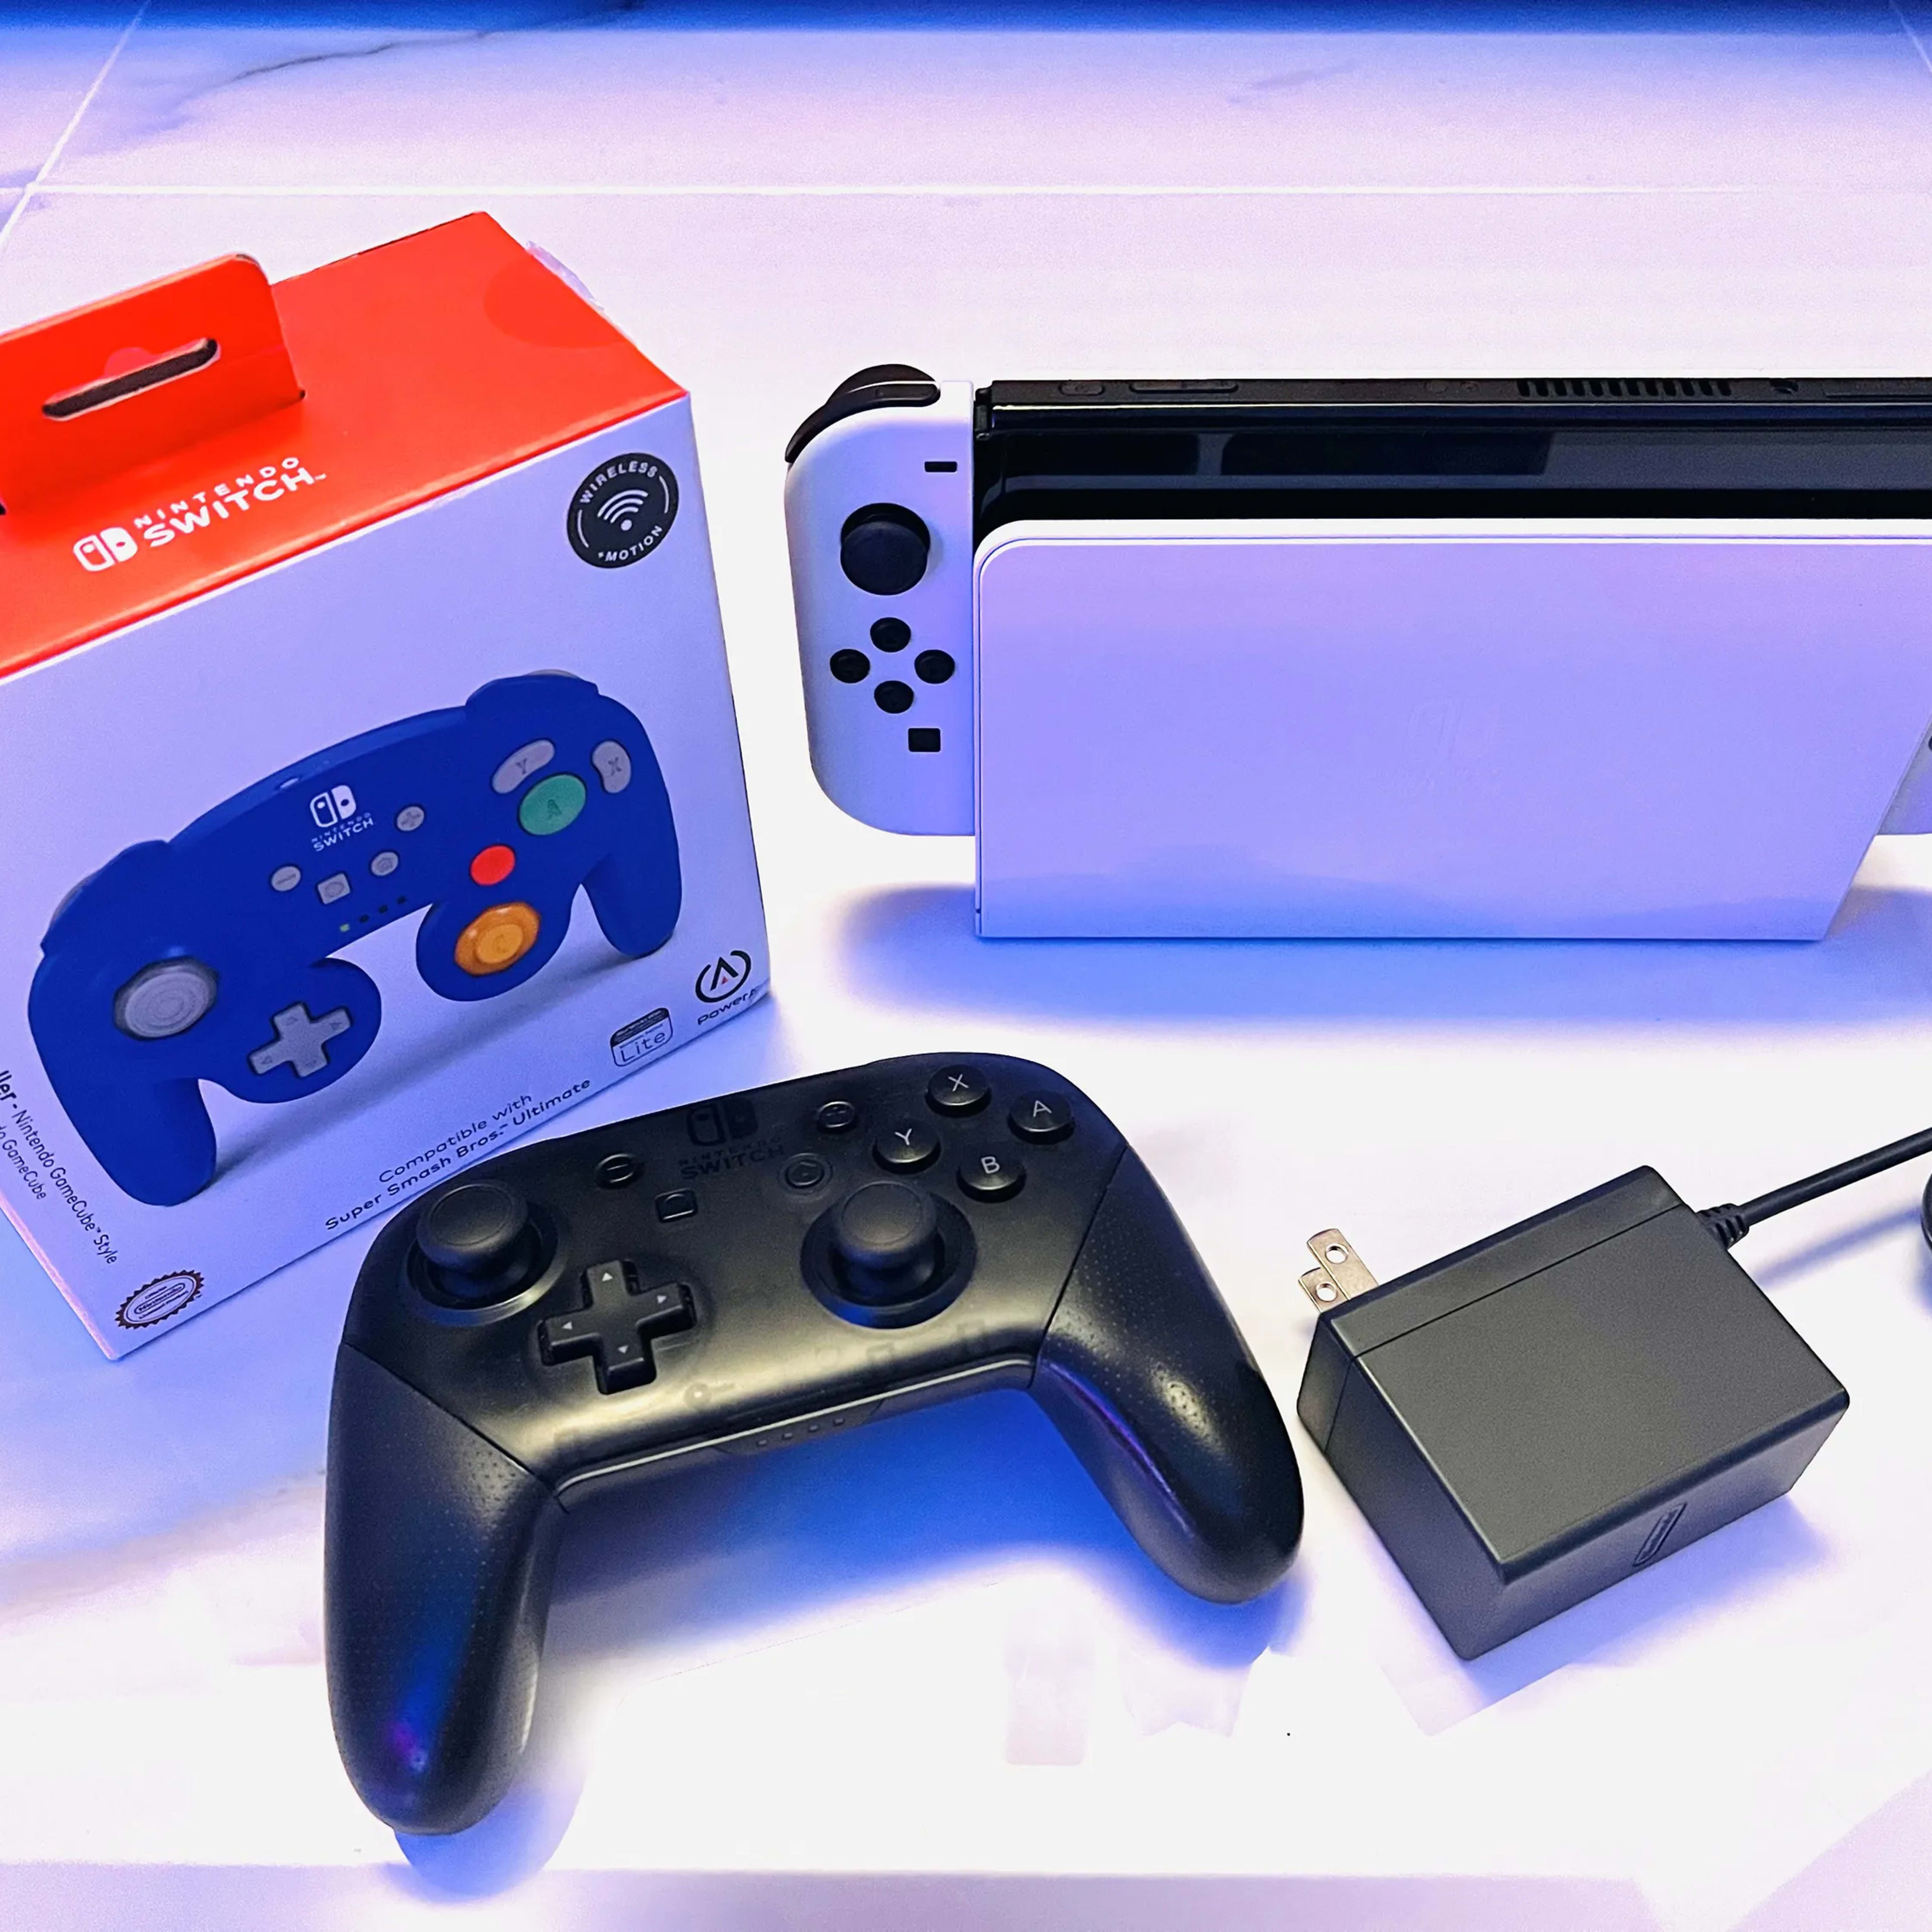 Nintendo Switch OLED + Accessories - Nearly Mint Condition - Heavily Discounted